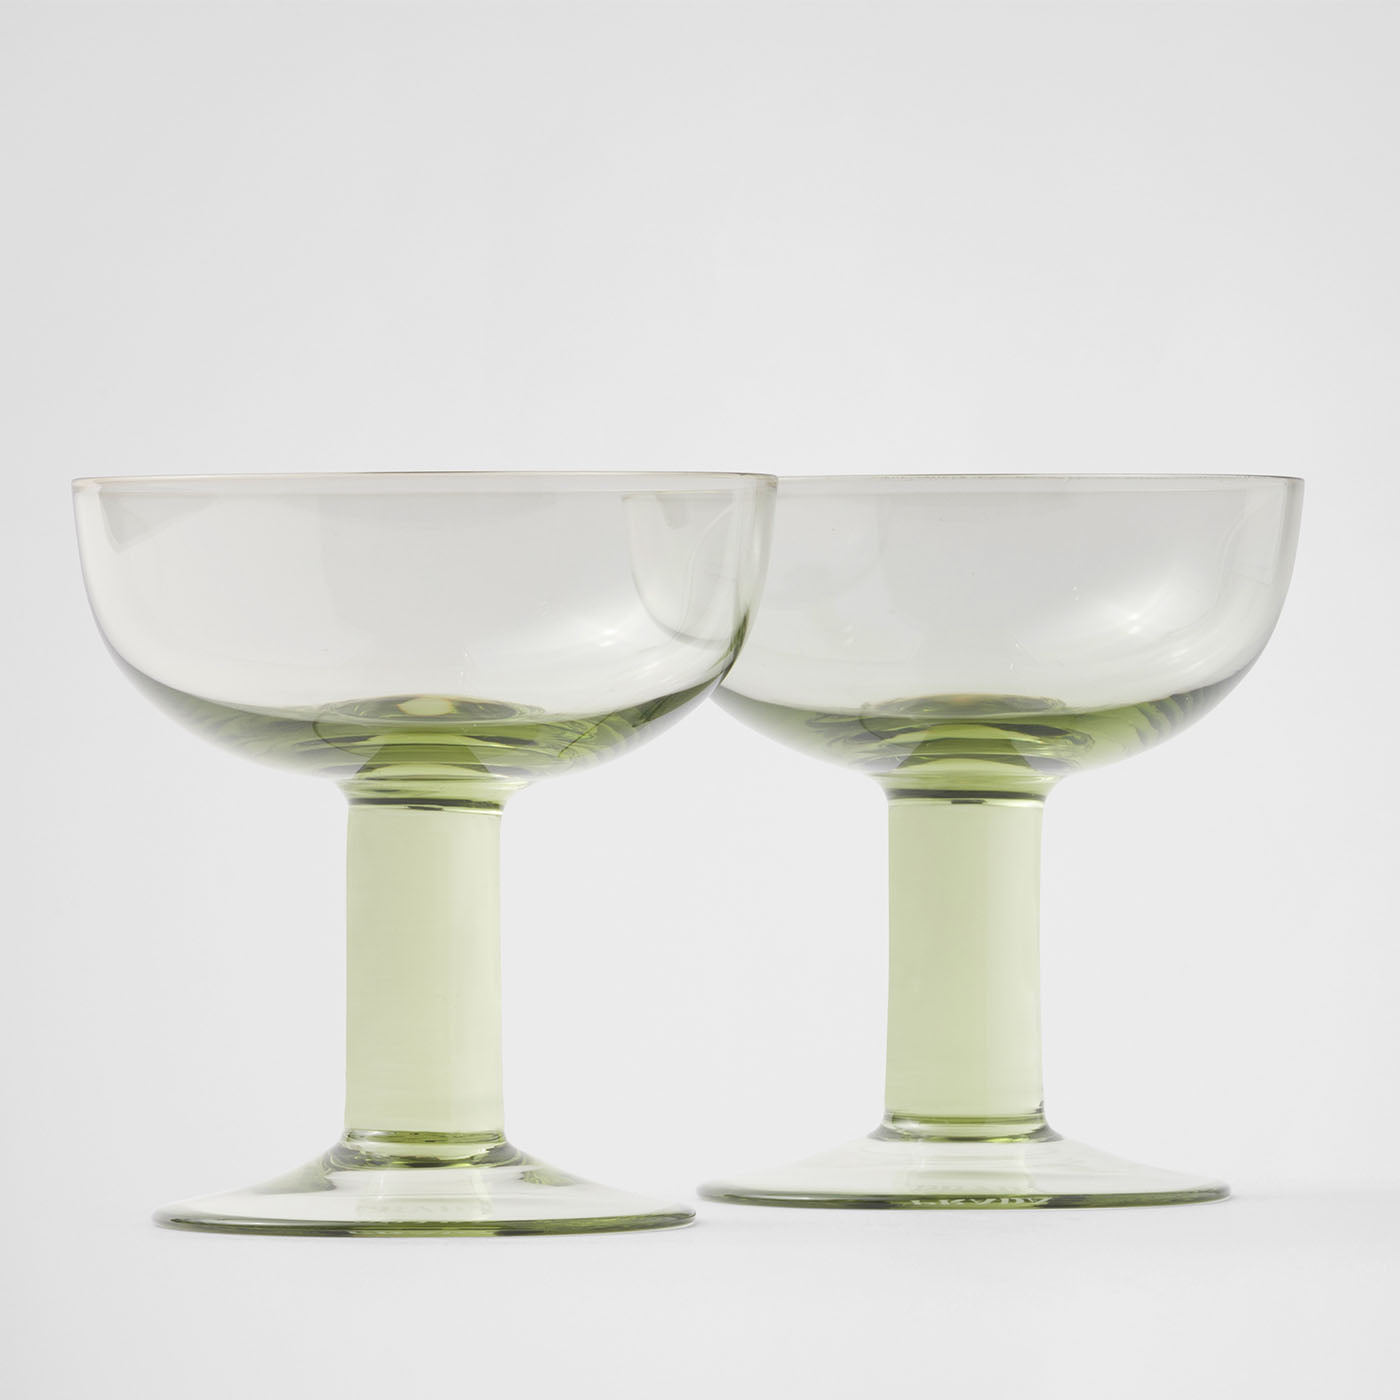 Plinth Set of two Crystal Champagne Coupe Glasses - Alternative view 1